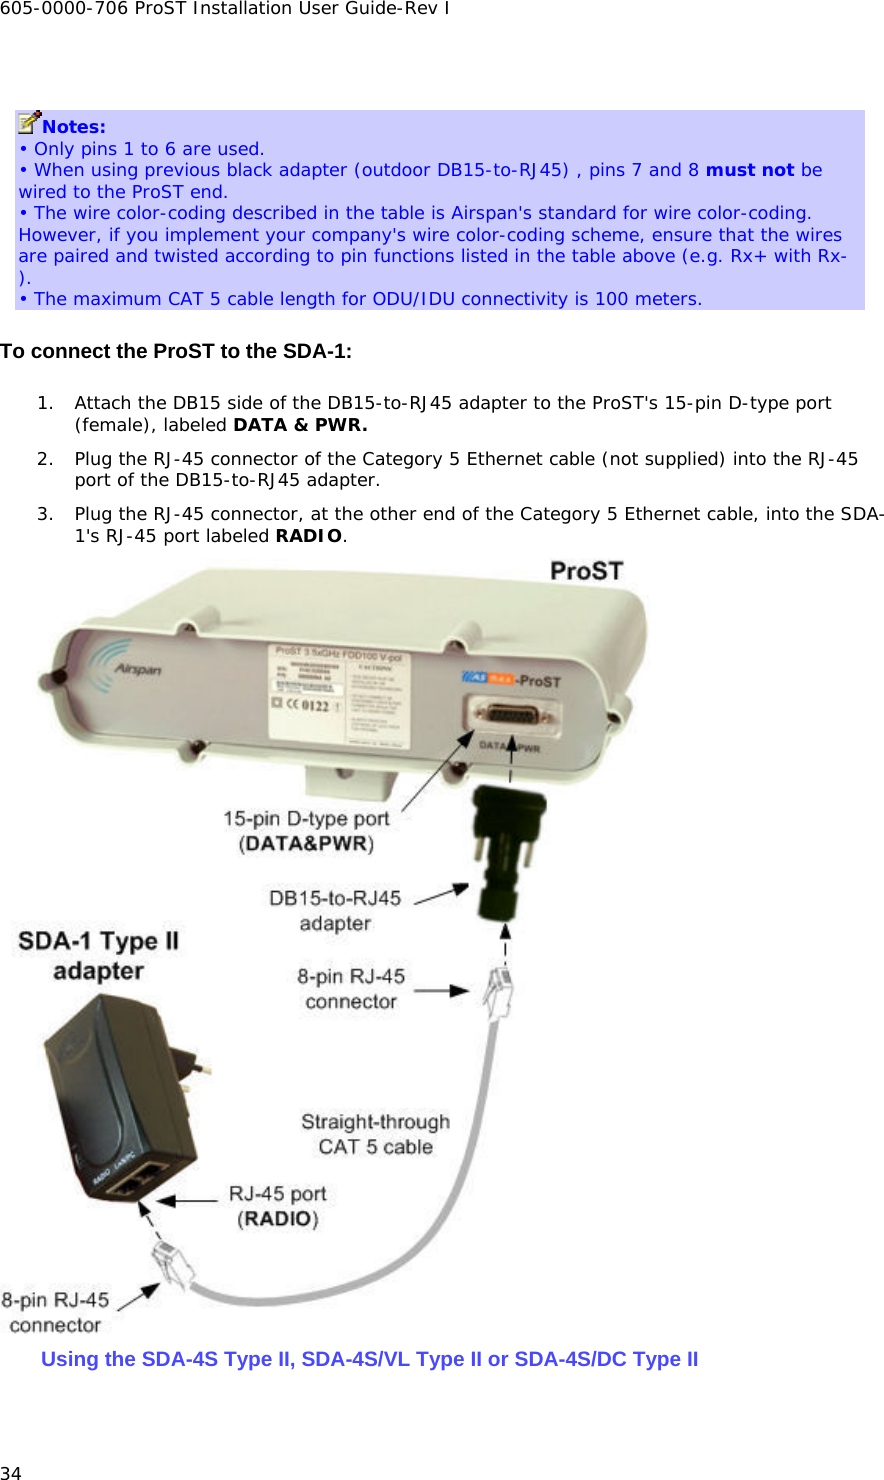 605-0000-706 ProST Installation User Guide-Rev I 34  Notes: • Only pins 1 to 6 are used. • When using previous black adapter (outdoor DB15-to-RJ45) , pins 7 and 8 must not be wired to the ProST end. • The wire color-coding described in the table is Airspan&apos;s standard for wire color-coding. However, if you implement your company&apos;s wire color-coding scheme, ensure that the wires are paired and twisted according to pin functions listed in the table above (e.g. Rx+ with Rx-). • The maximum CAT 5 cable length for ODU/IDU connectivity is 100 meters. To connect the ProST to the SDA-1: 1. Attach the DB15 side of the DB15-to-RJ45 adapter to the ProST&apos;s 15-pin D-type port (female), labeled DATA &amp; PWR. 2. Plug the RJ-45 connector of the Category 5 Ethernet cable (not supplied) into the RJ-45 port of the DB15-to-RJ45 adapter. 3. Plug the RJ-45 connector, at the other end of the Category 5 Ethernet cable, into the SDA-1&apos;s RJ-45 port labeled RADIO.  Using the SDA-4S Type II, SDA-4S/VL Type II or SDA-4S/DC Type II 